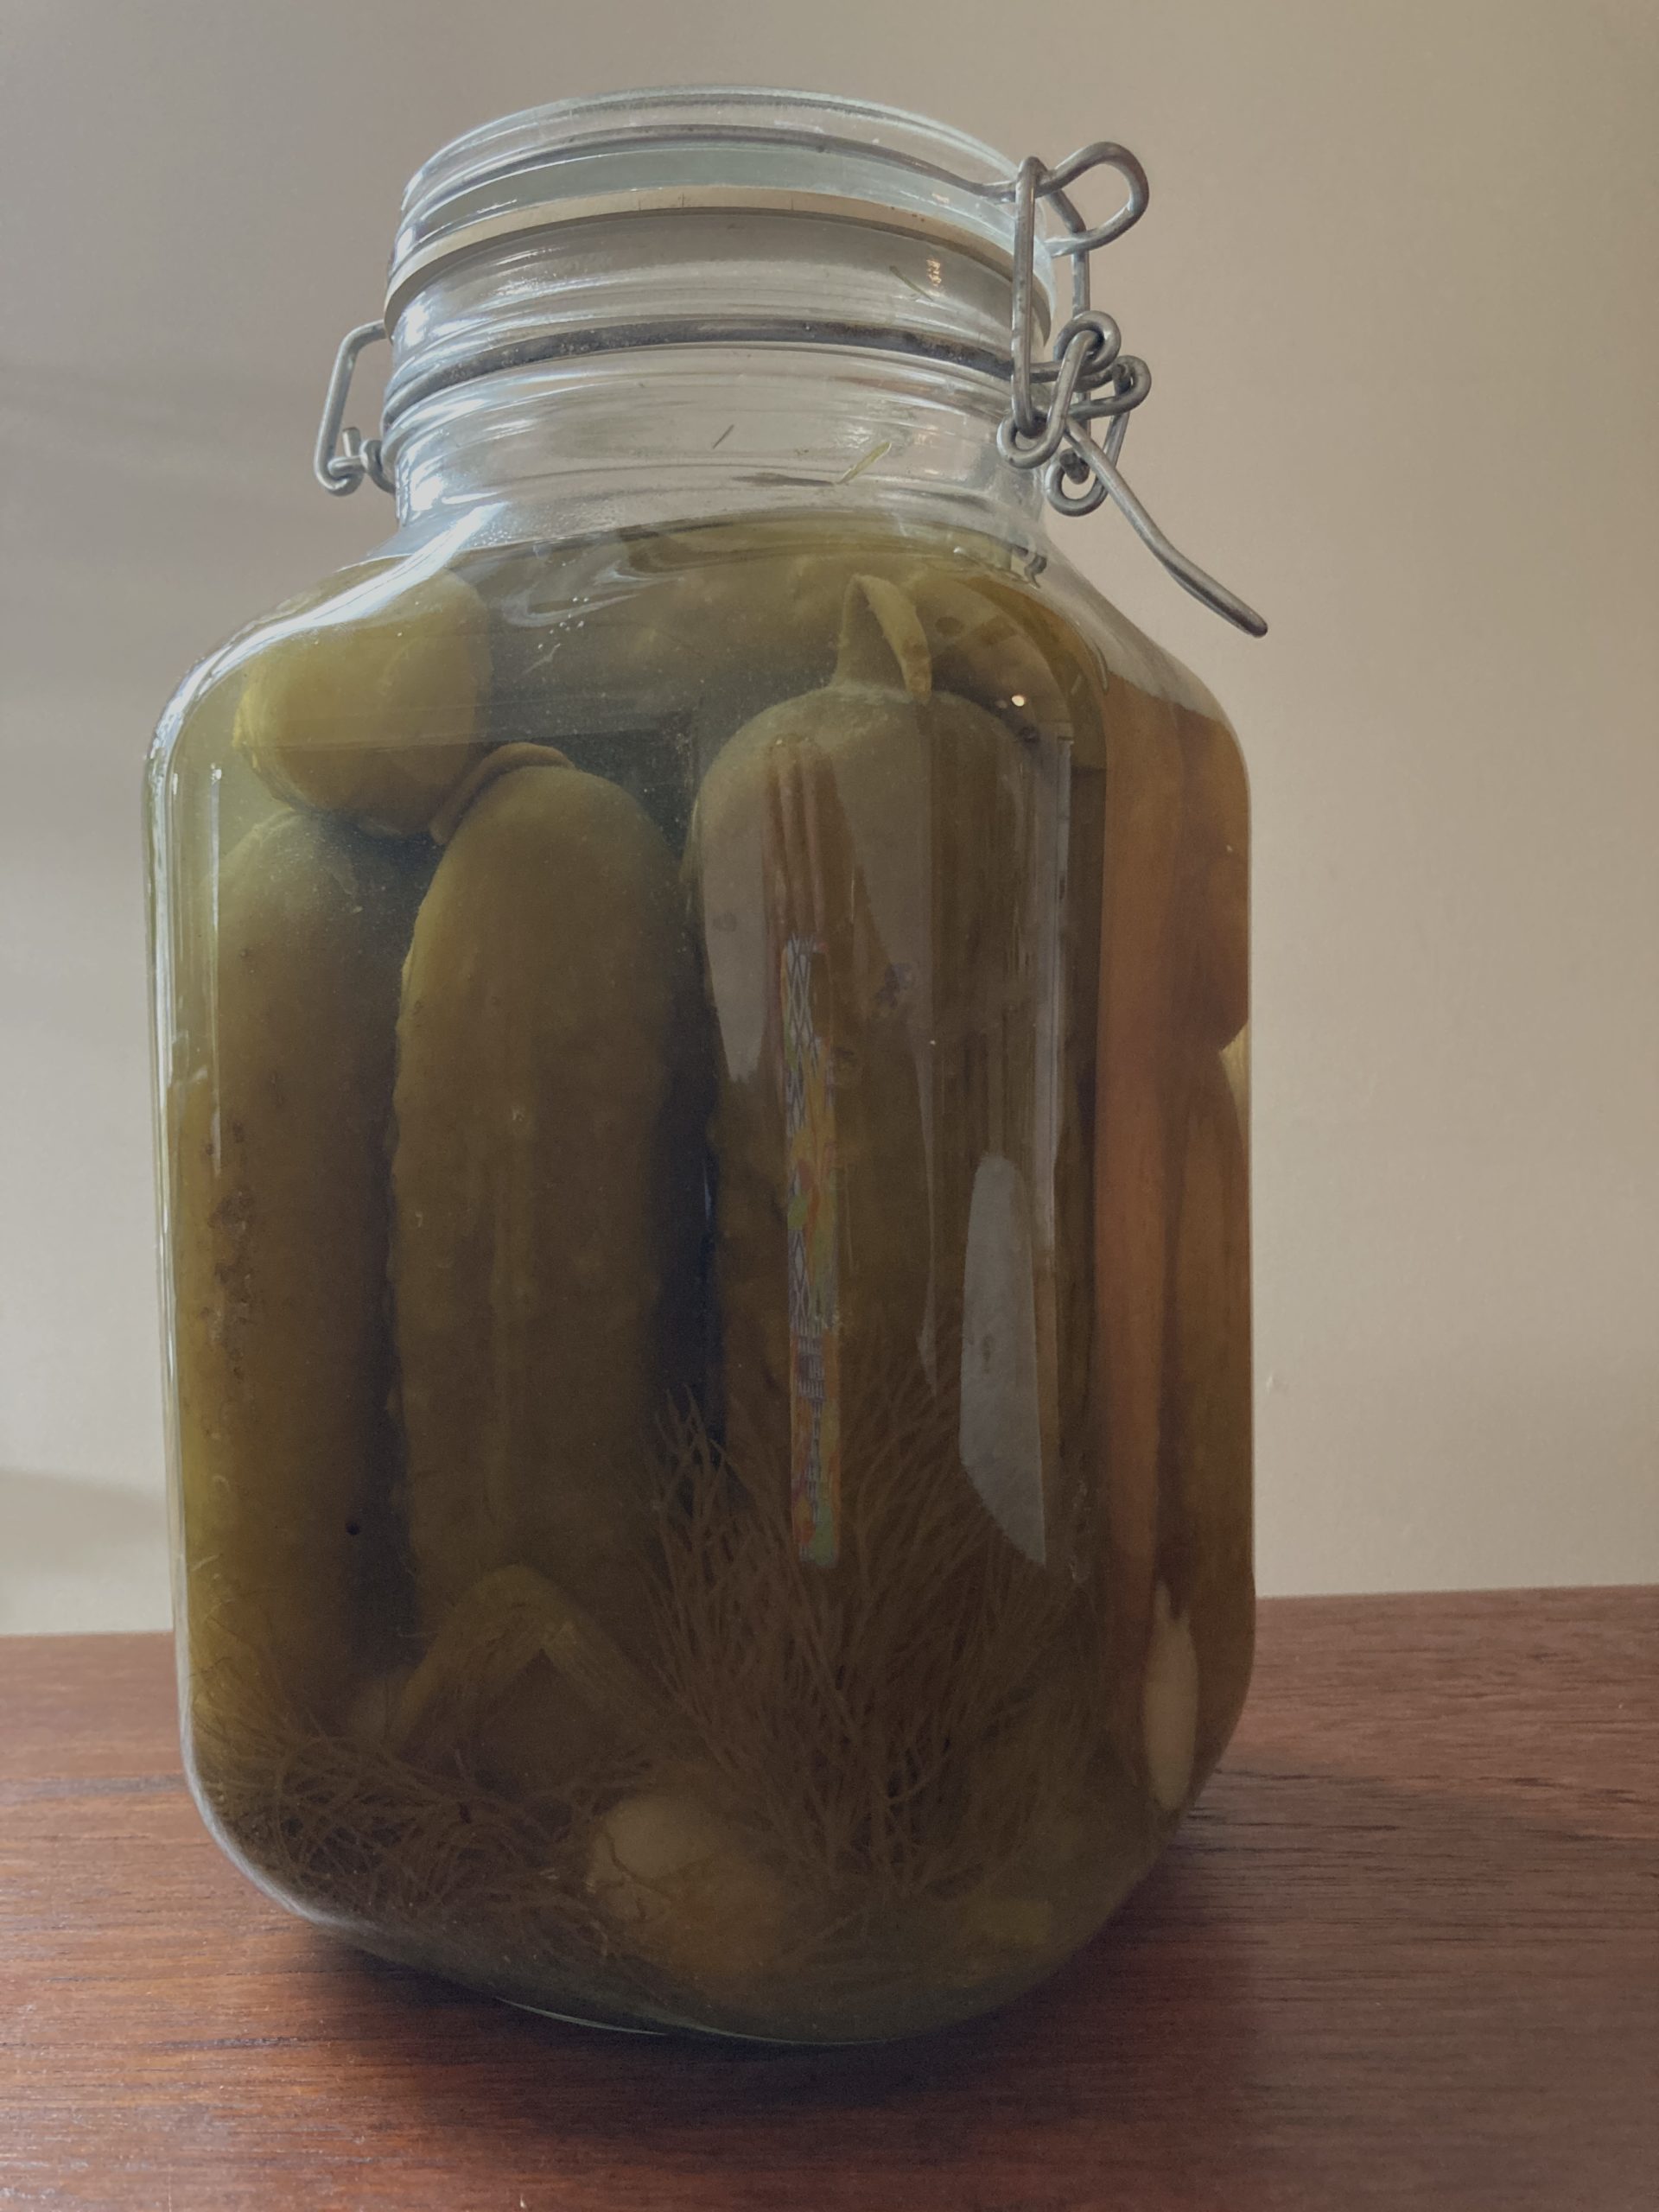 Winter Canning: A Love Affair with My Pressure Canner - Sufficient Growing